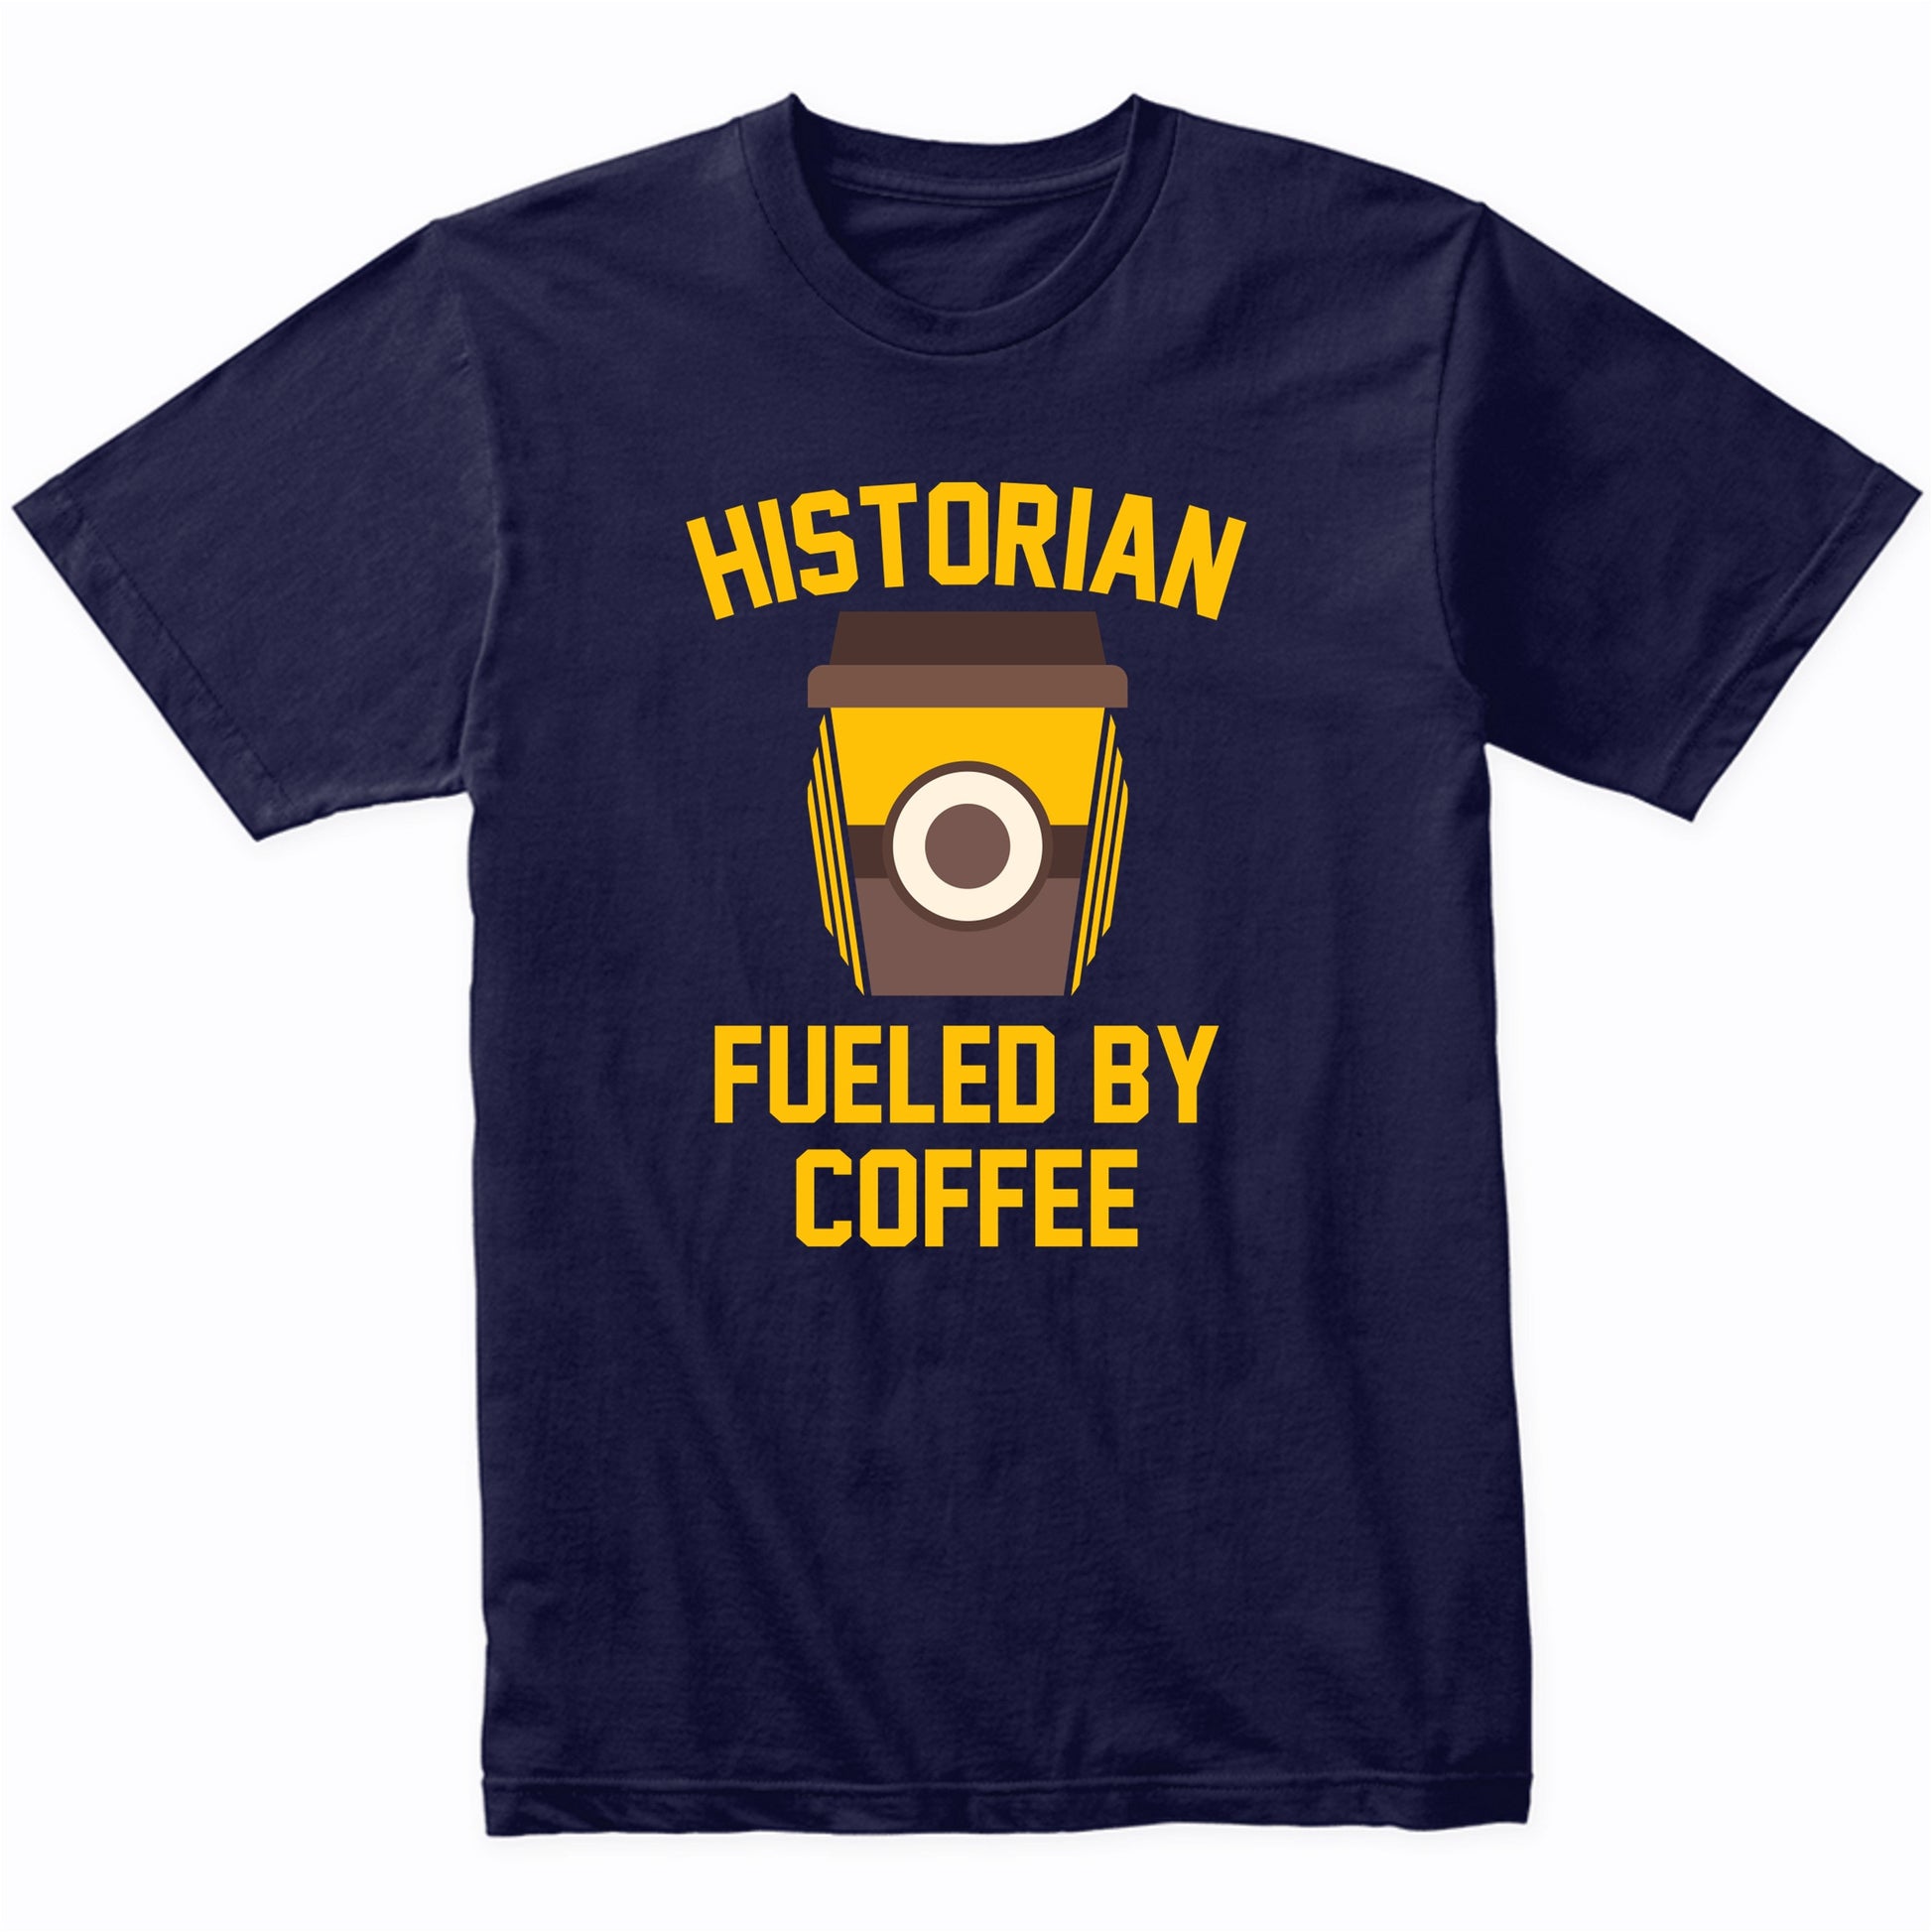 Historian Fueled By Coffee Funny Shirt